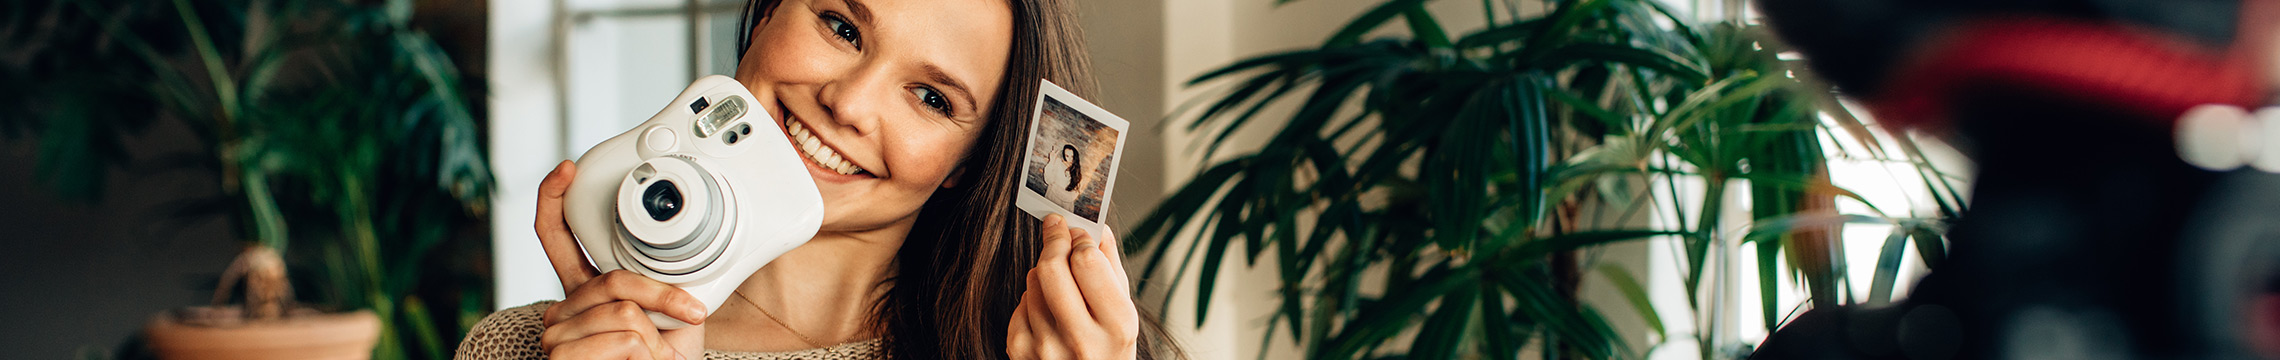 Woman blogger recording video while showing off polaroid camera